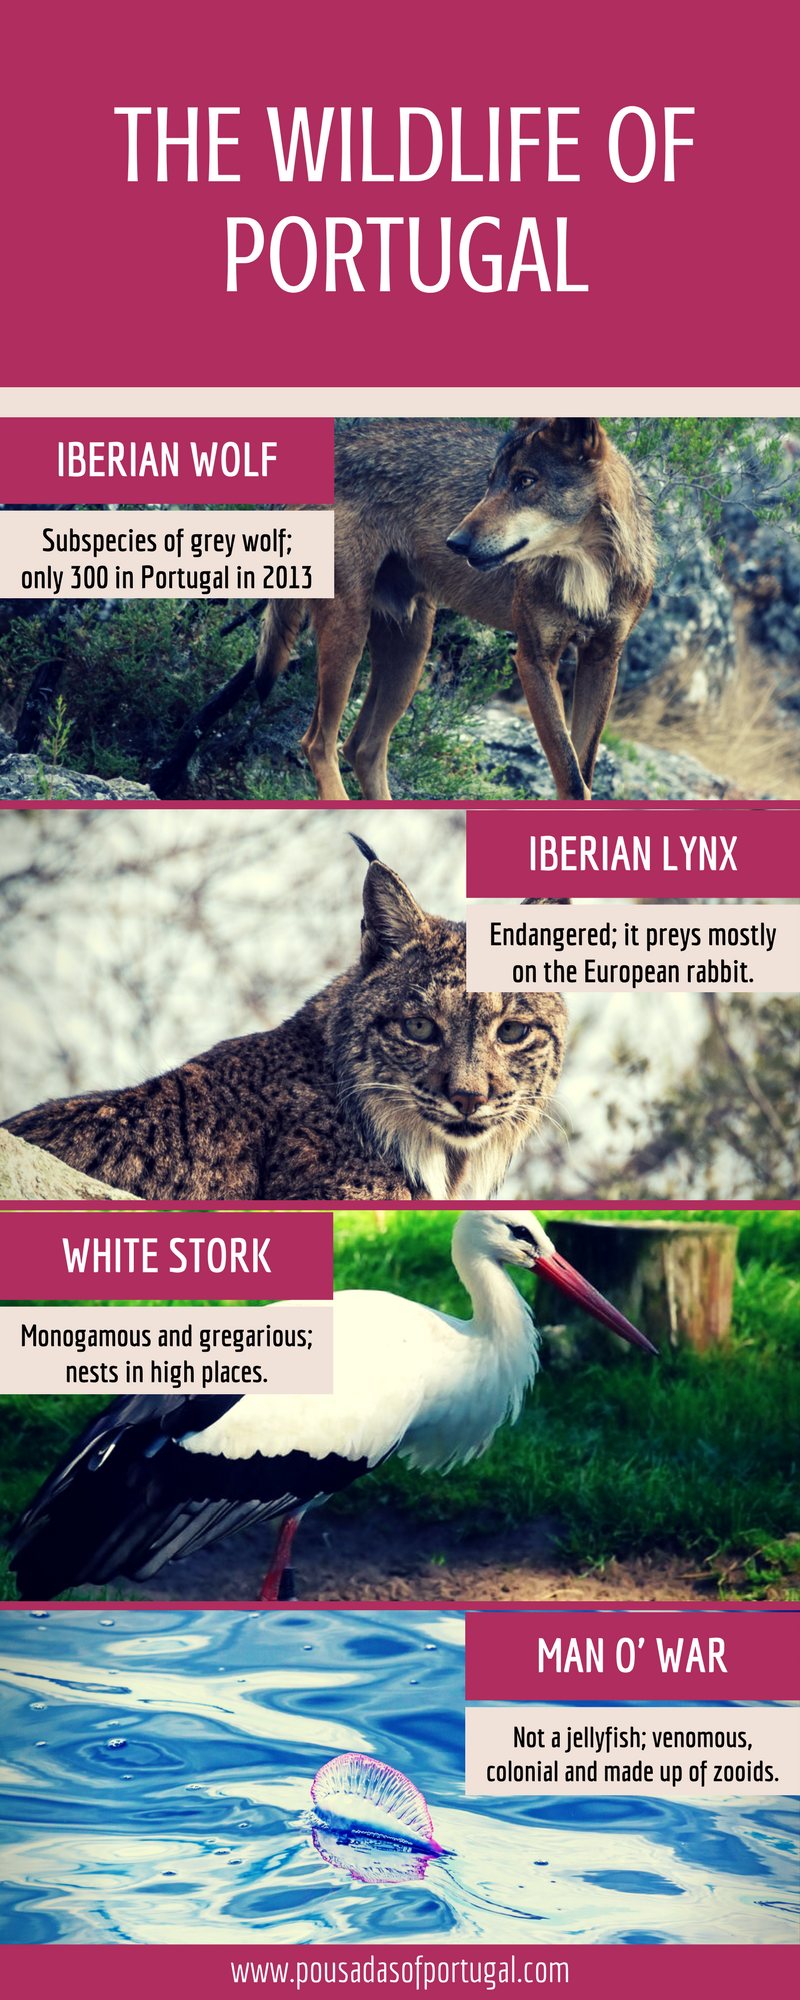 The Wildlife of Portugal (Infographic)